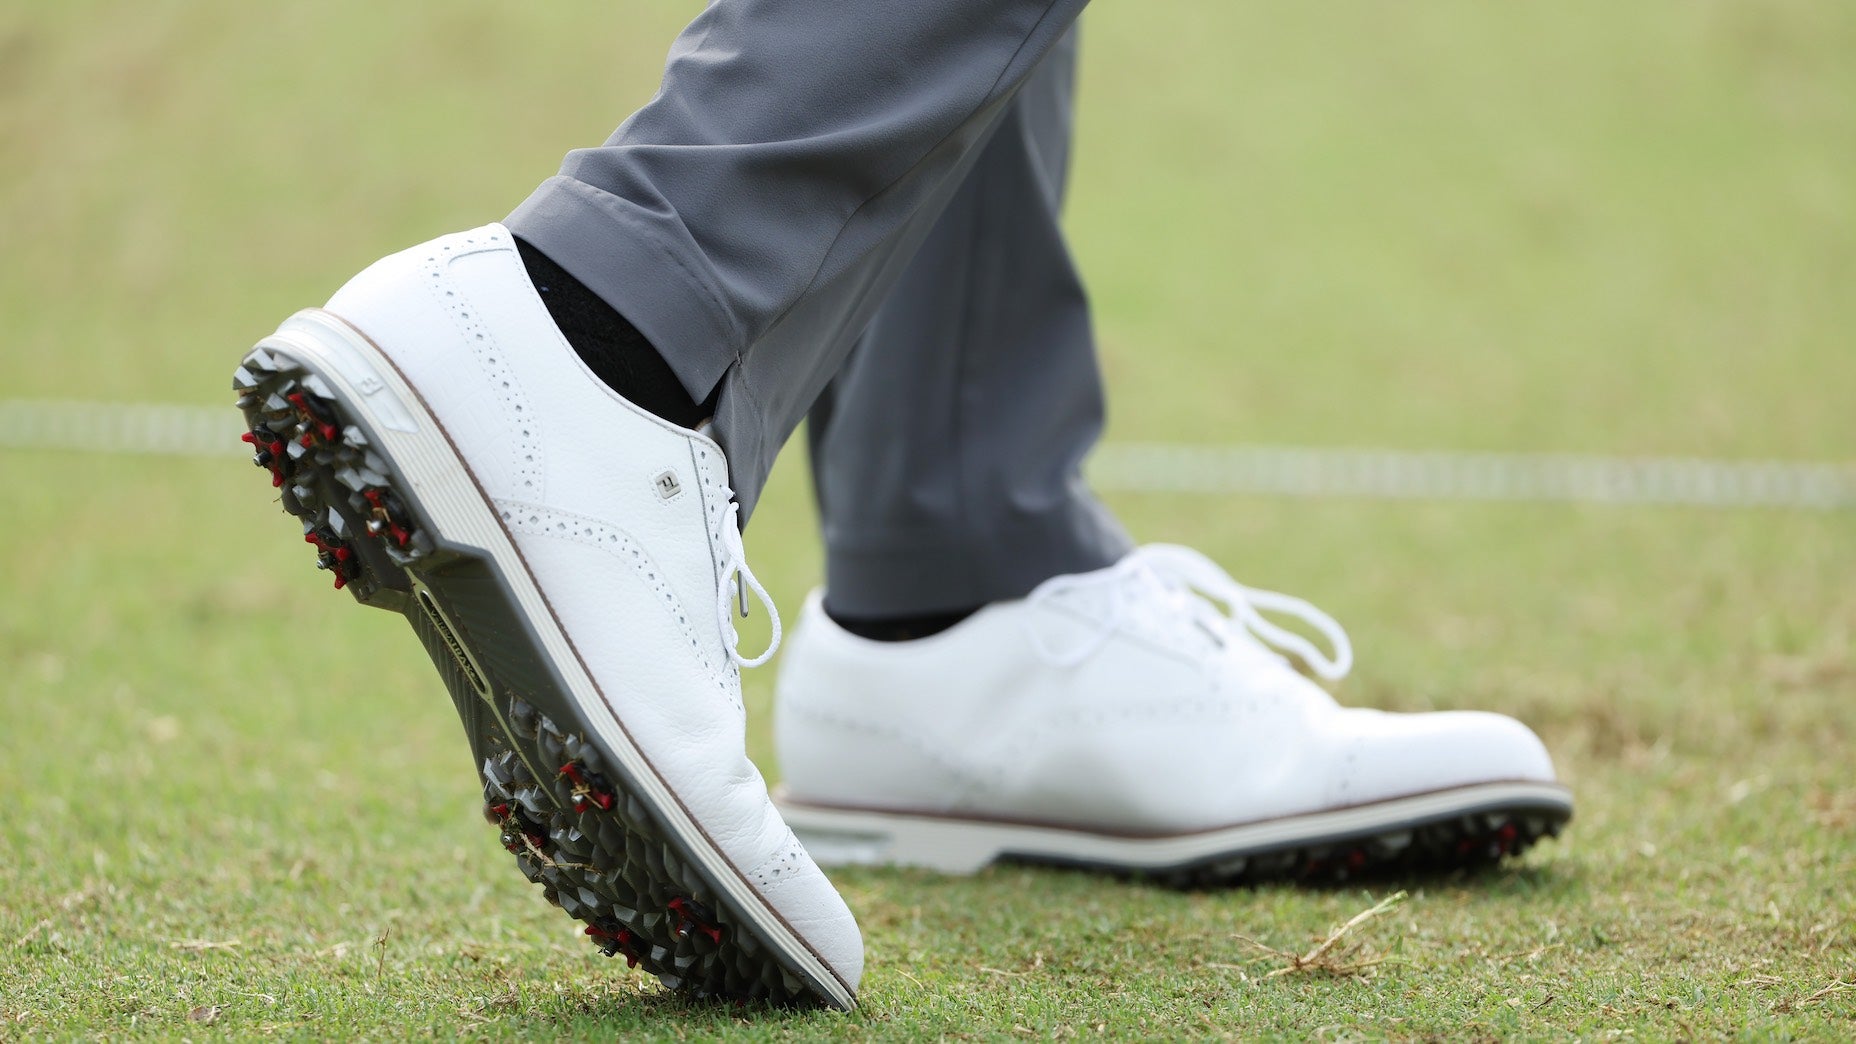 Equipped still many mailbag wear pros spikes? Fully metal How tour |